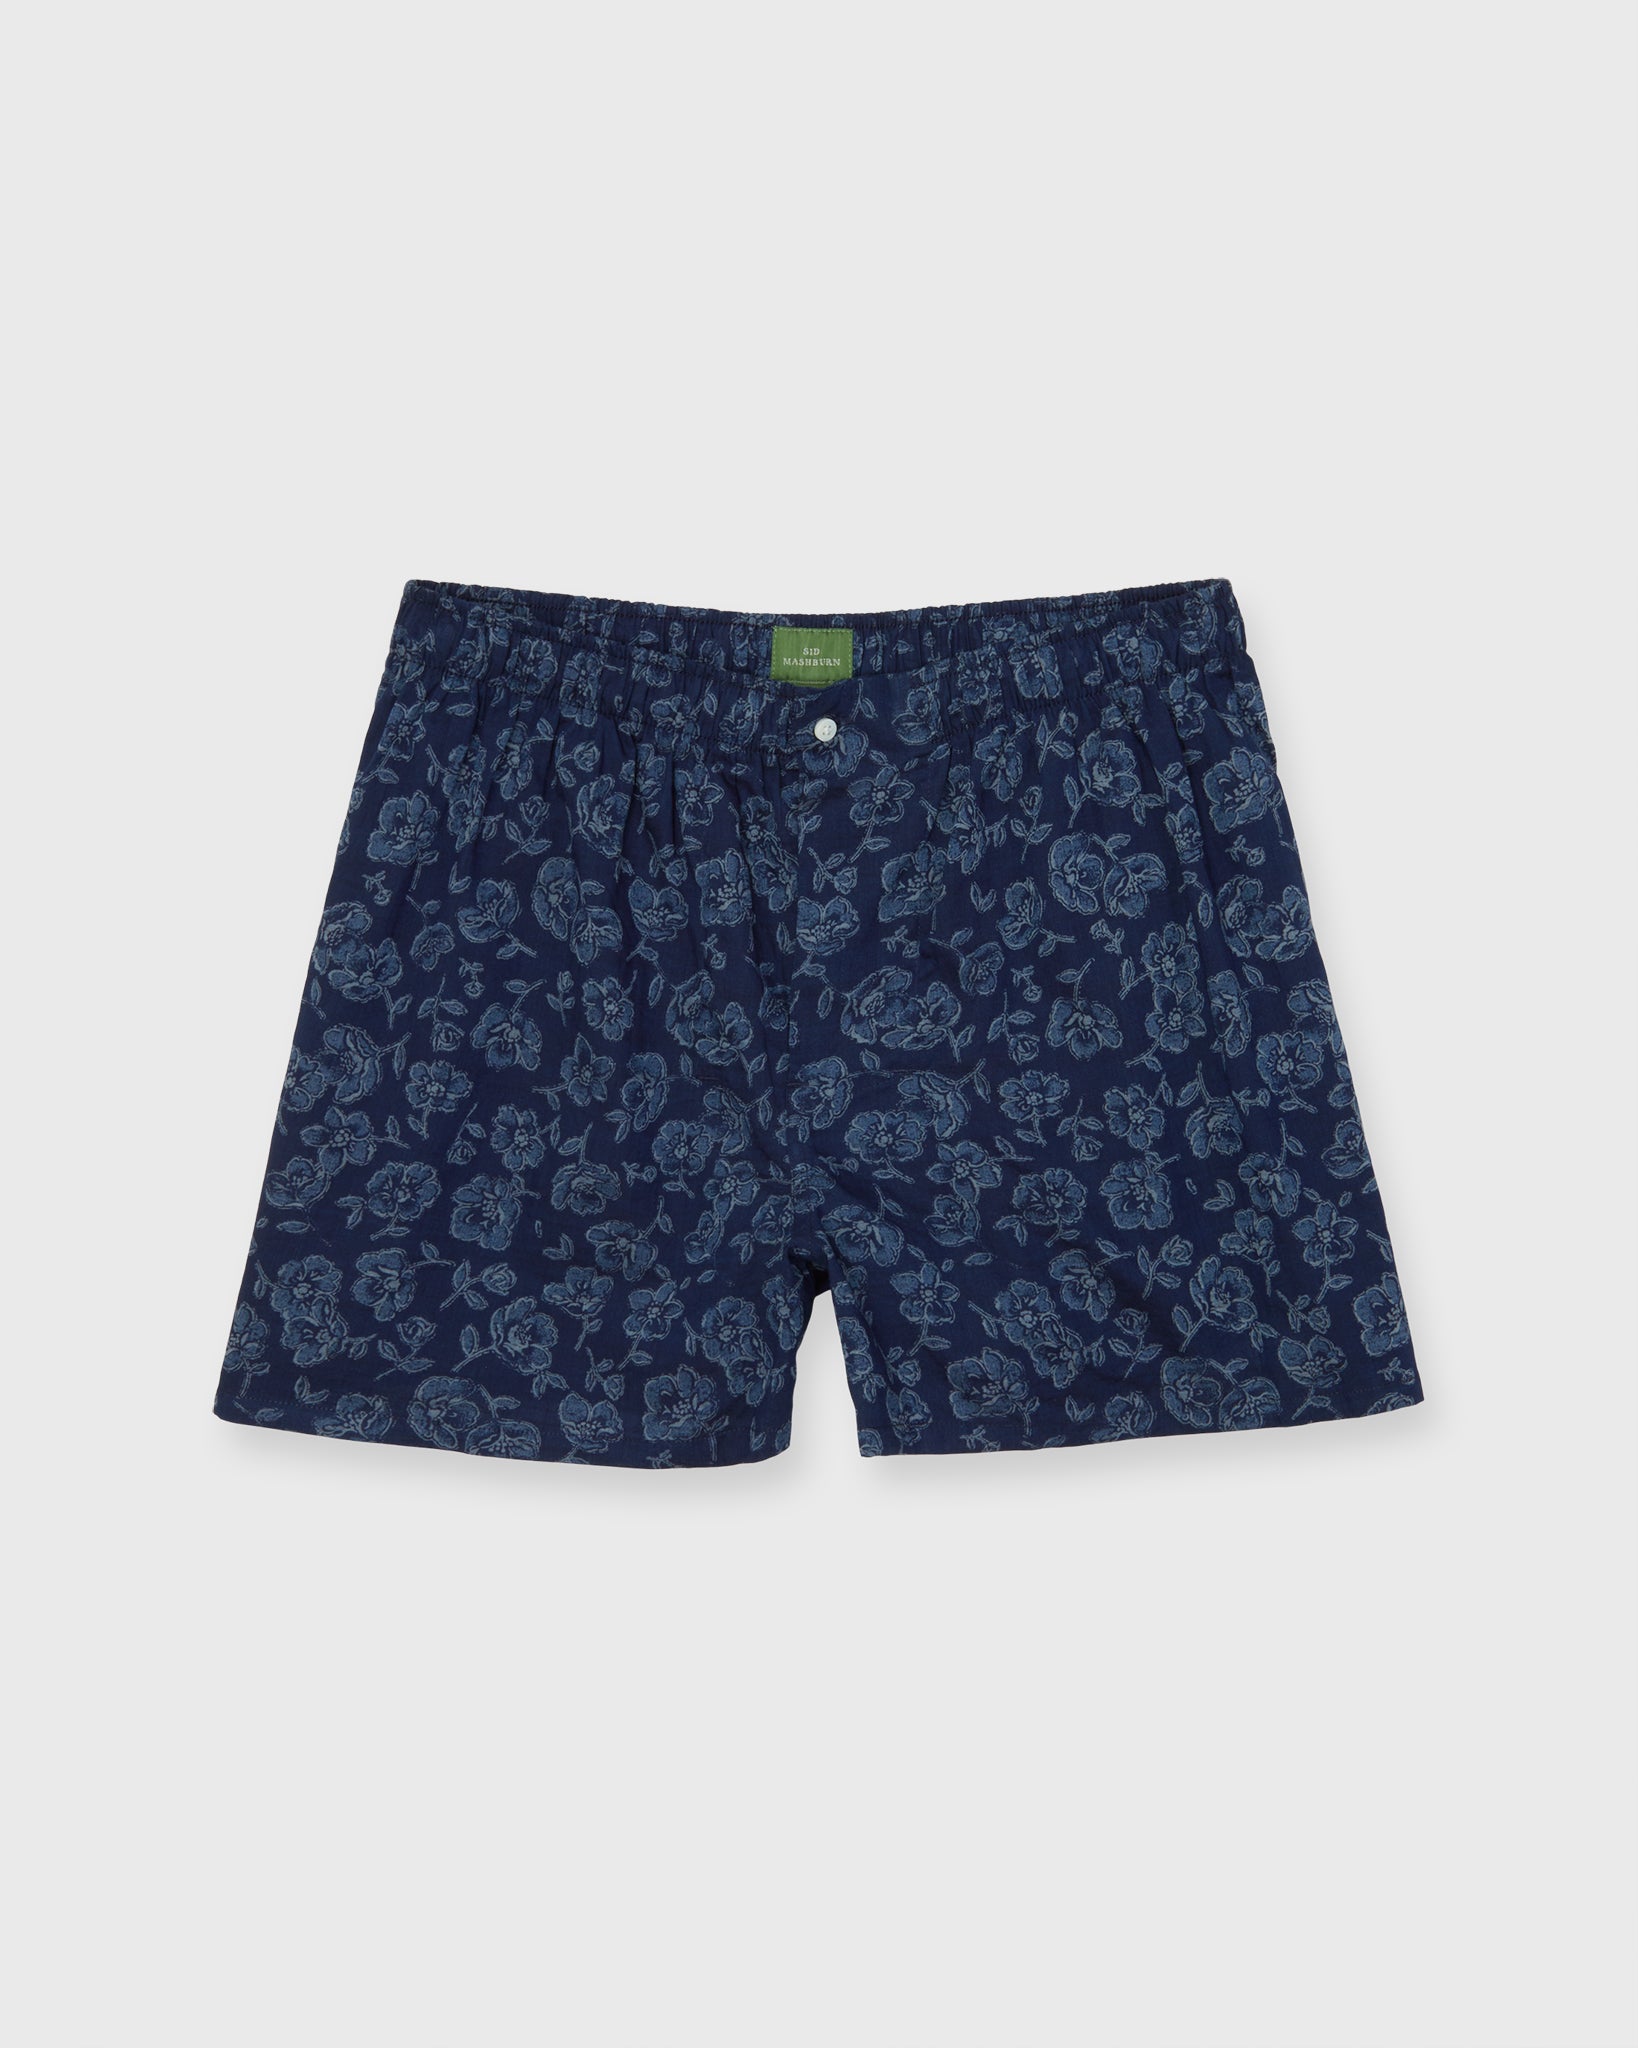 Button-Front Boxer Short in Navy/Slate/Grey Floral Print Poplin